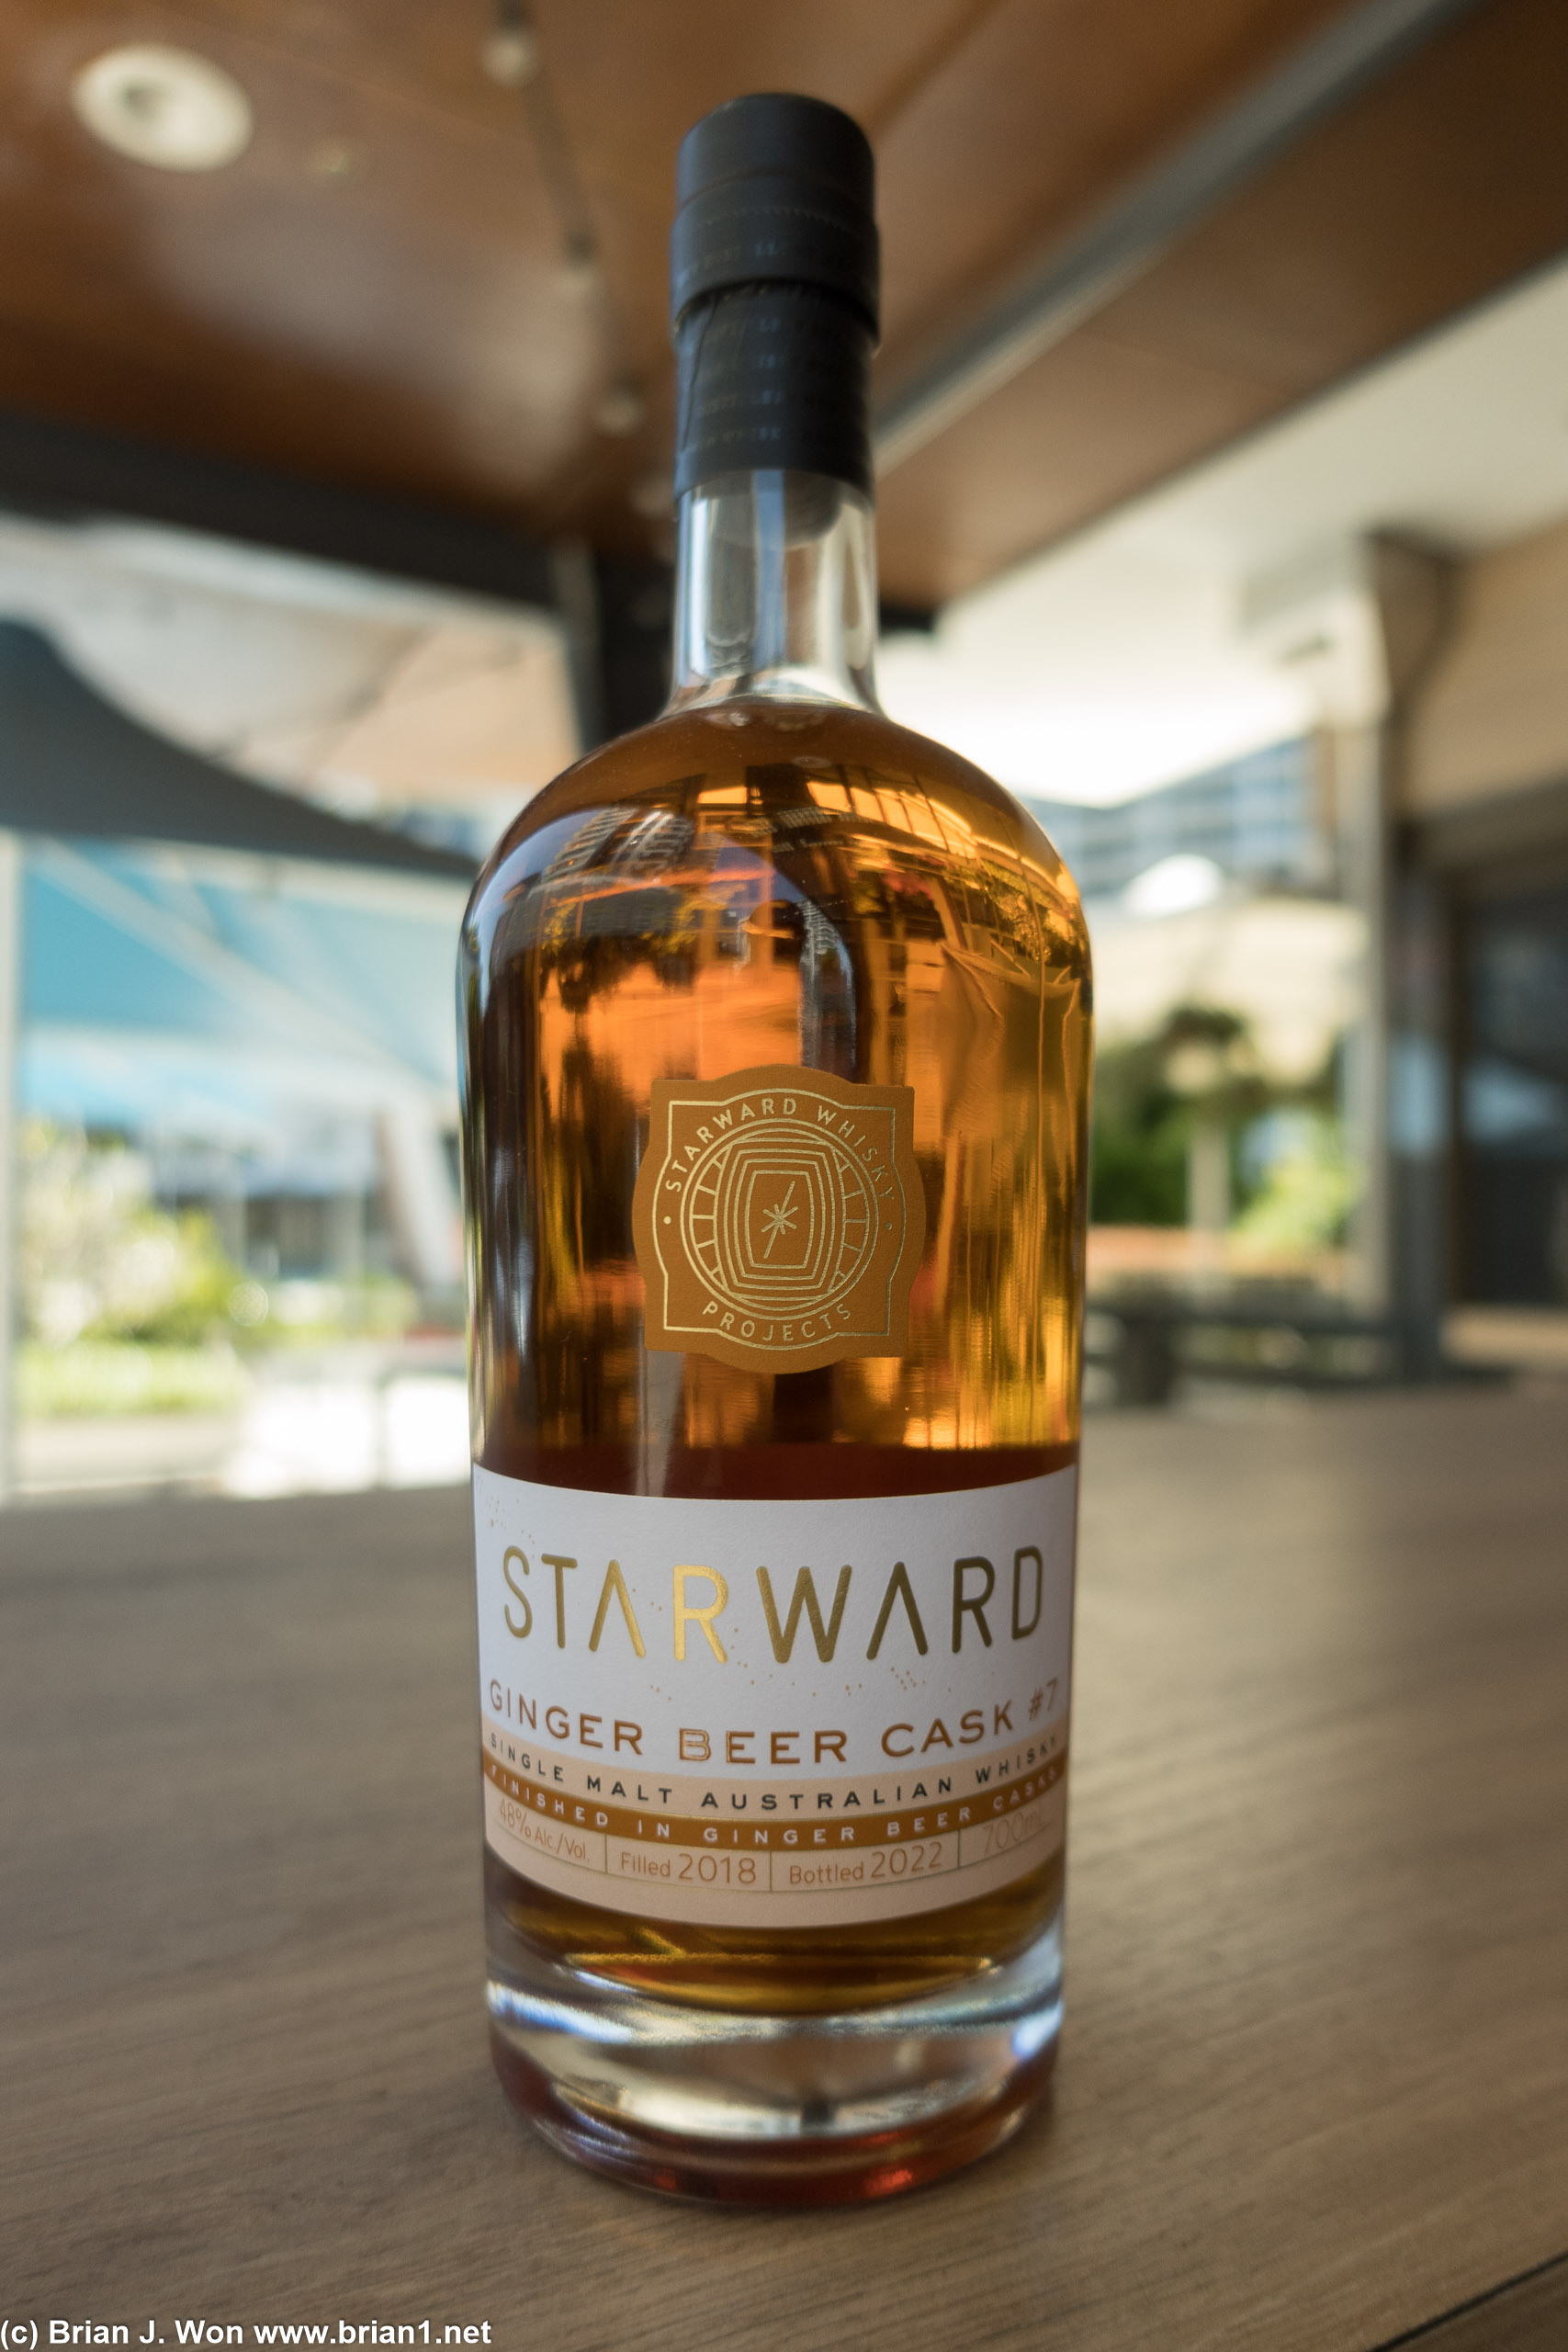 Starward Ginger Beer Cask is not exported to the USA.